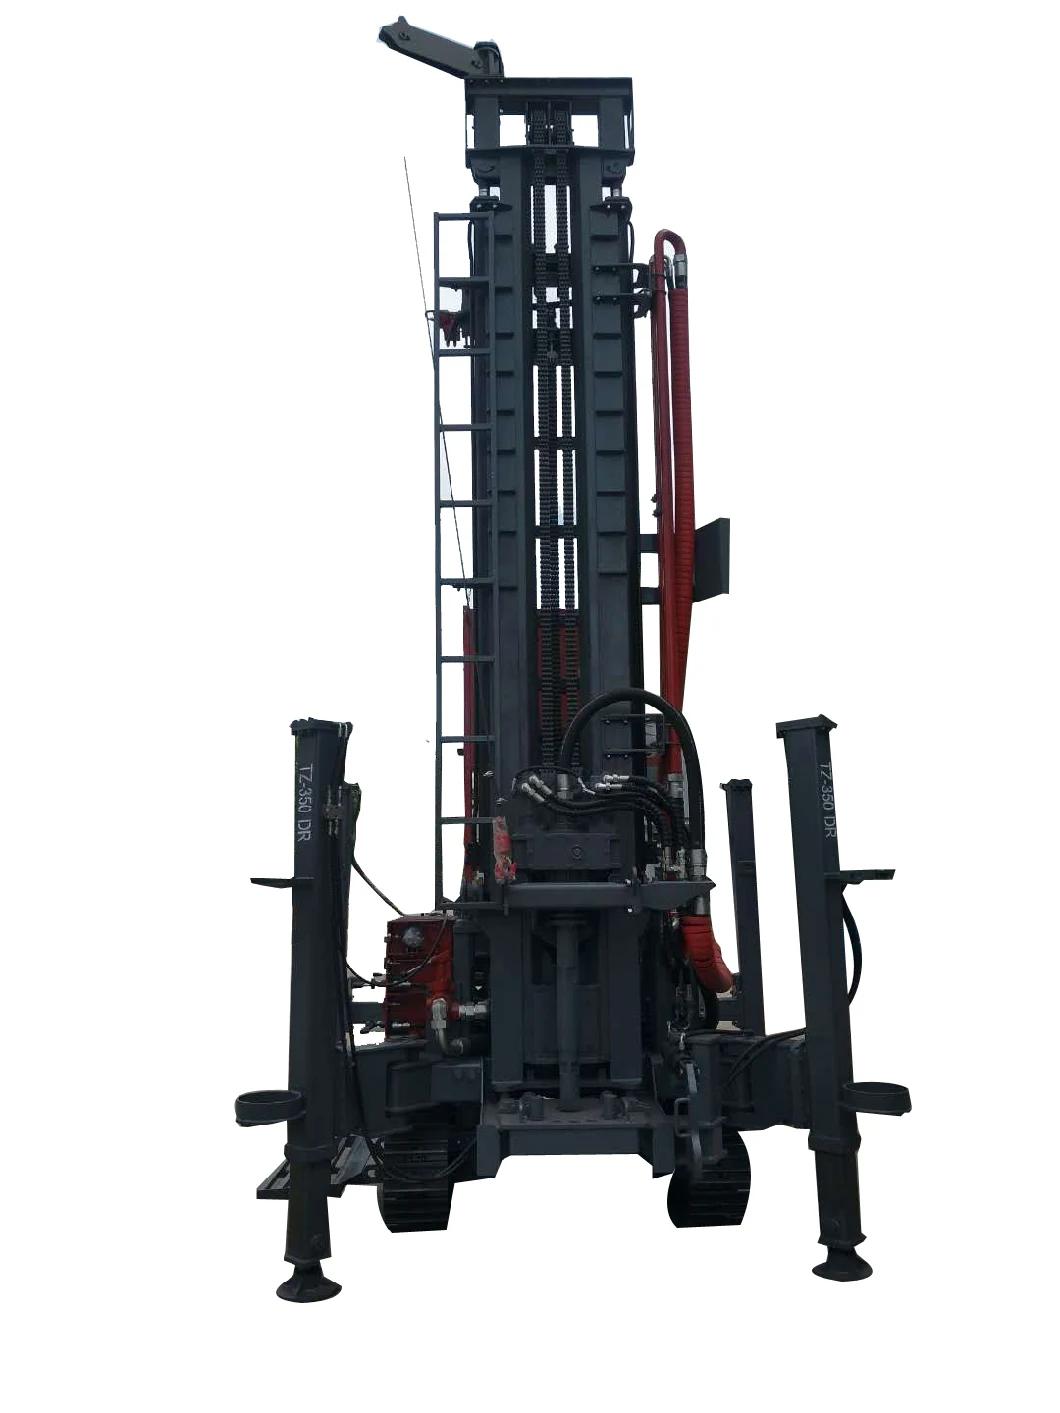 260m Crawler Hydraulic Top Drive Water Well Drilling Rig